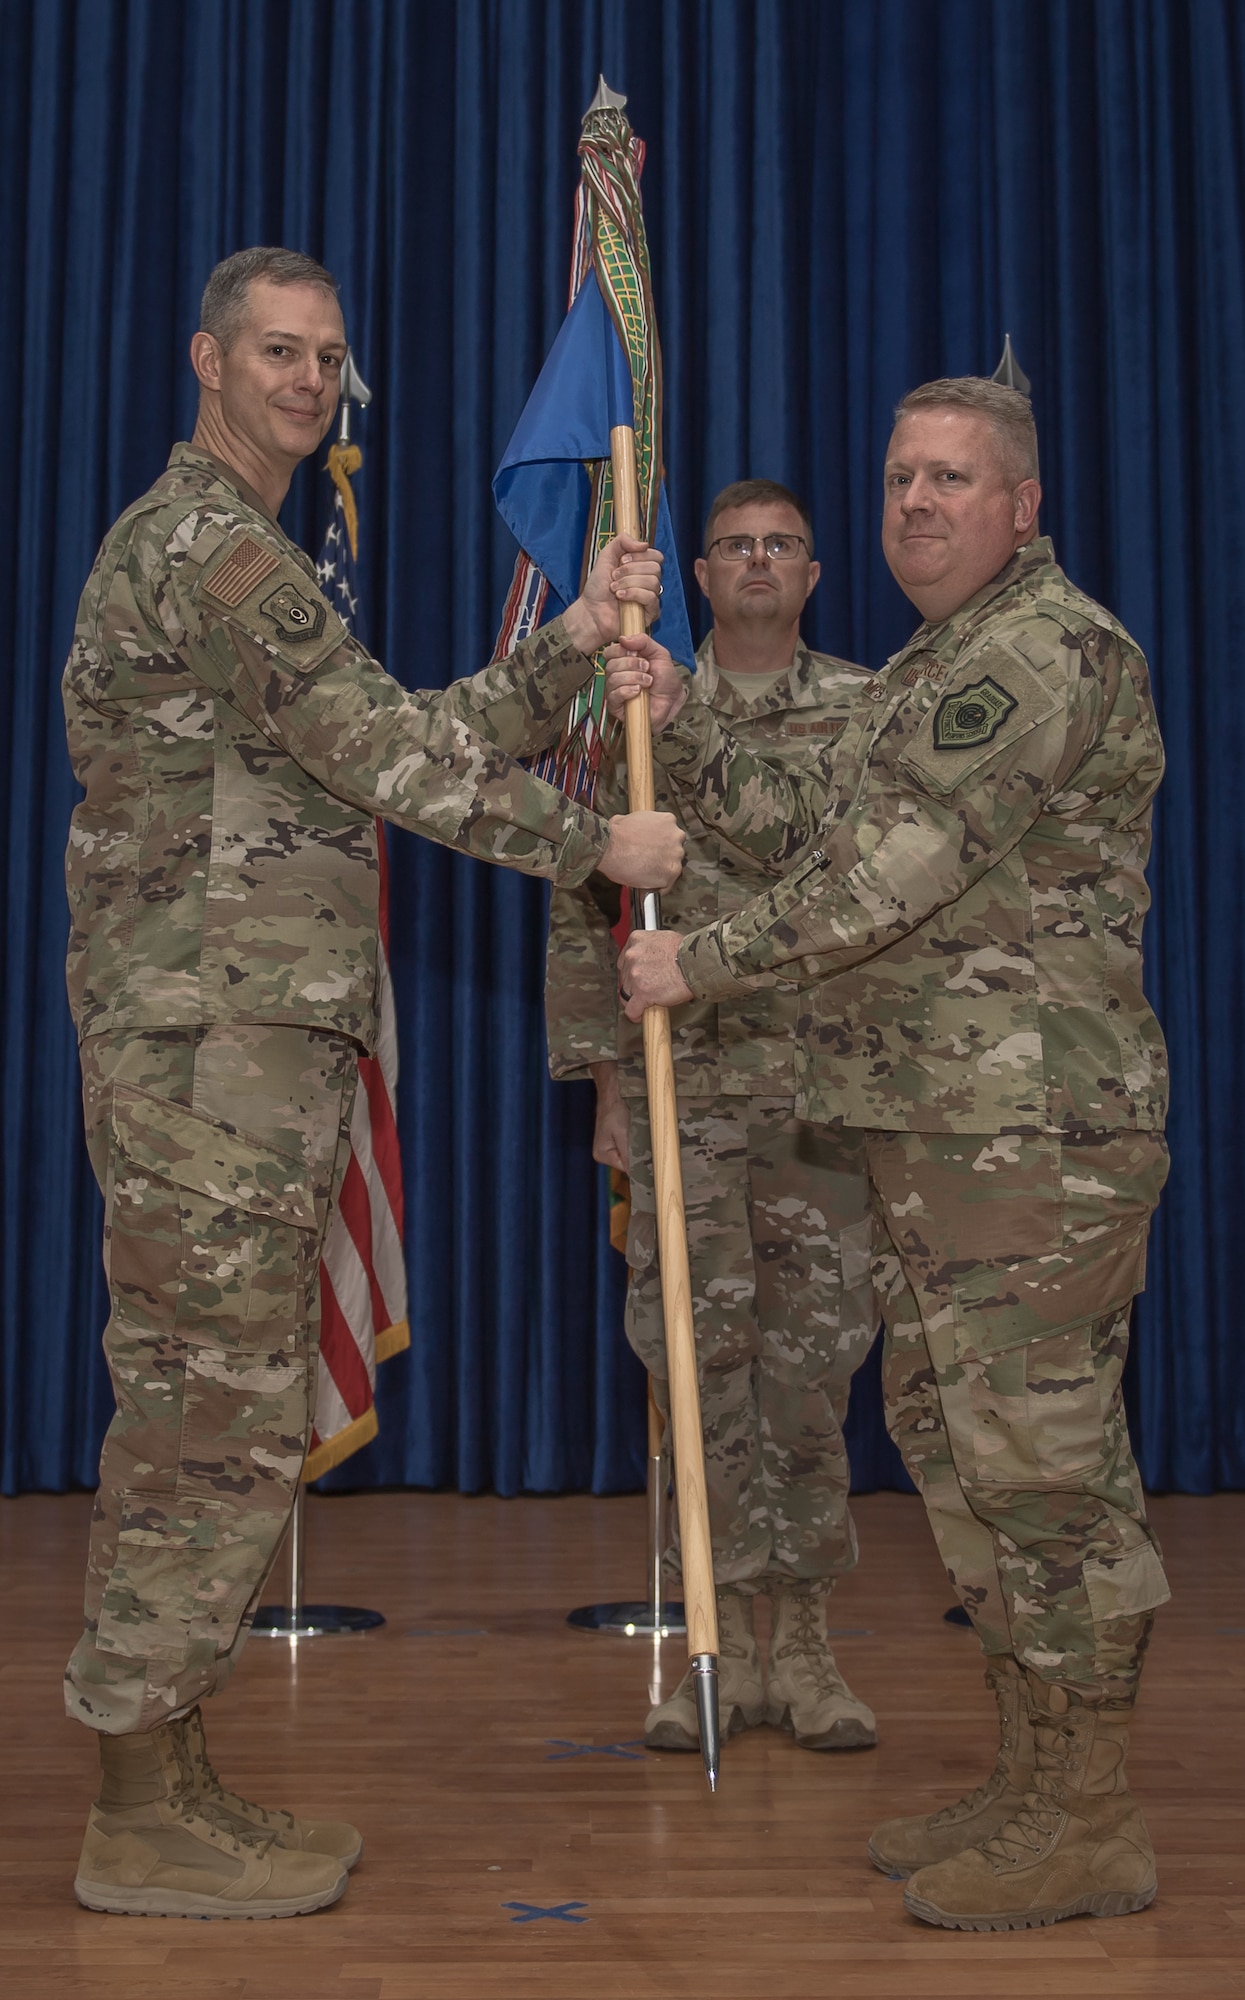 U.S. Air Force Col. Rodney Simpson assumes command of the 386th Air Expedtionary Wing from officiator, Maj. Gen. Alexus G. Grynkewich, 9th Air Expedtionary Task Force-Levant commander, during a change of command ceremony at Ali Al Salem Air Base, Kuwait, July 11, 2019. Simpson took over command of the 386th AEW from Col. Patrick Schlichenmeyer. (U.S. Air Force photo by Tech. Sgt. Daniel Martinez)